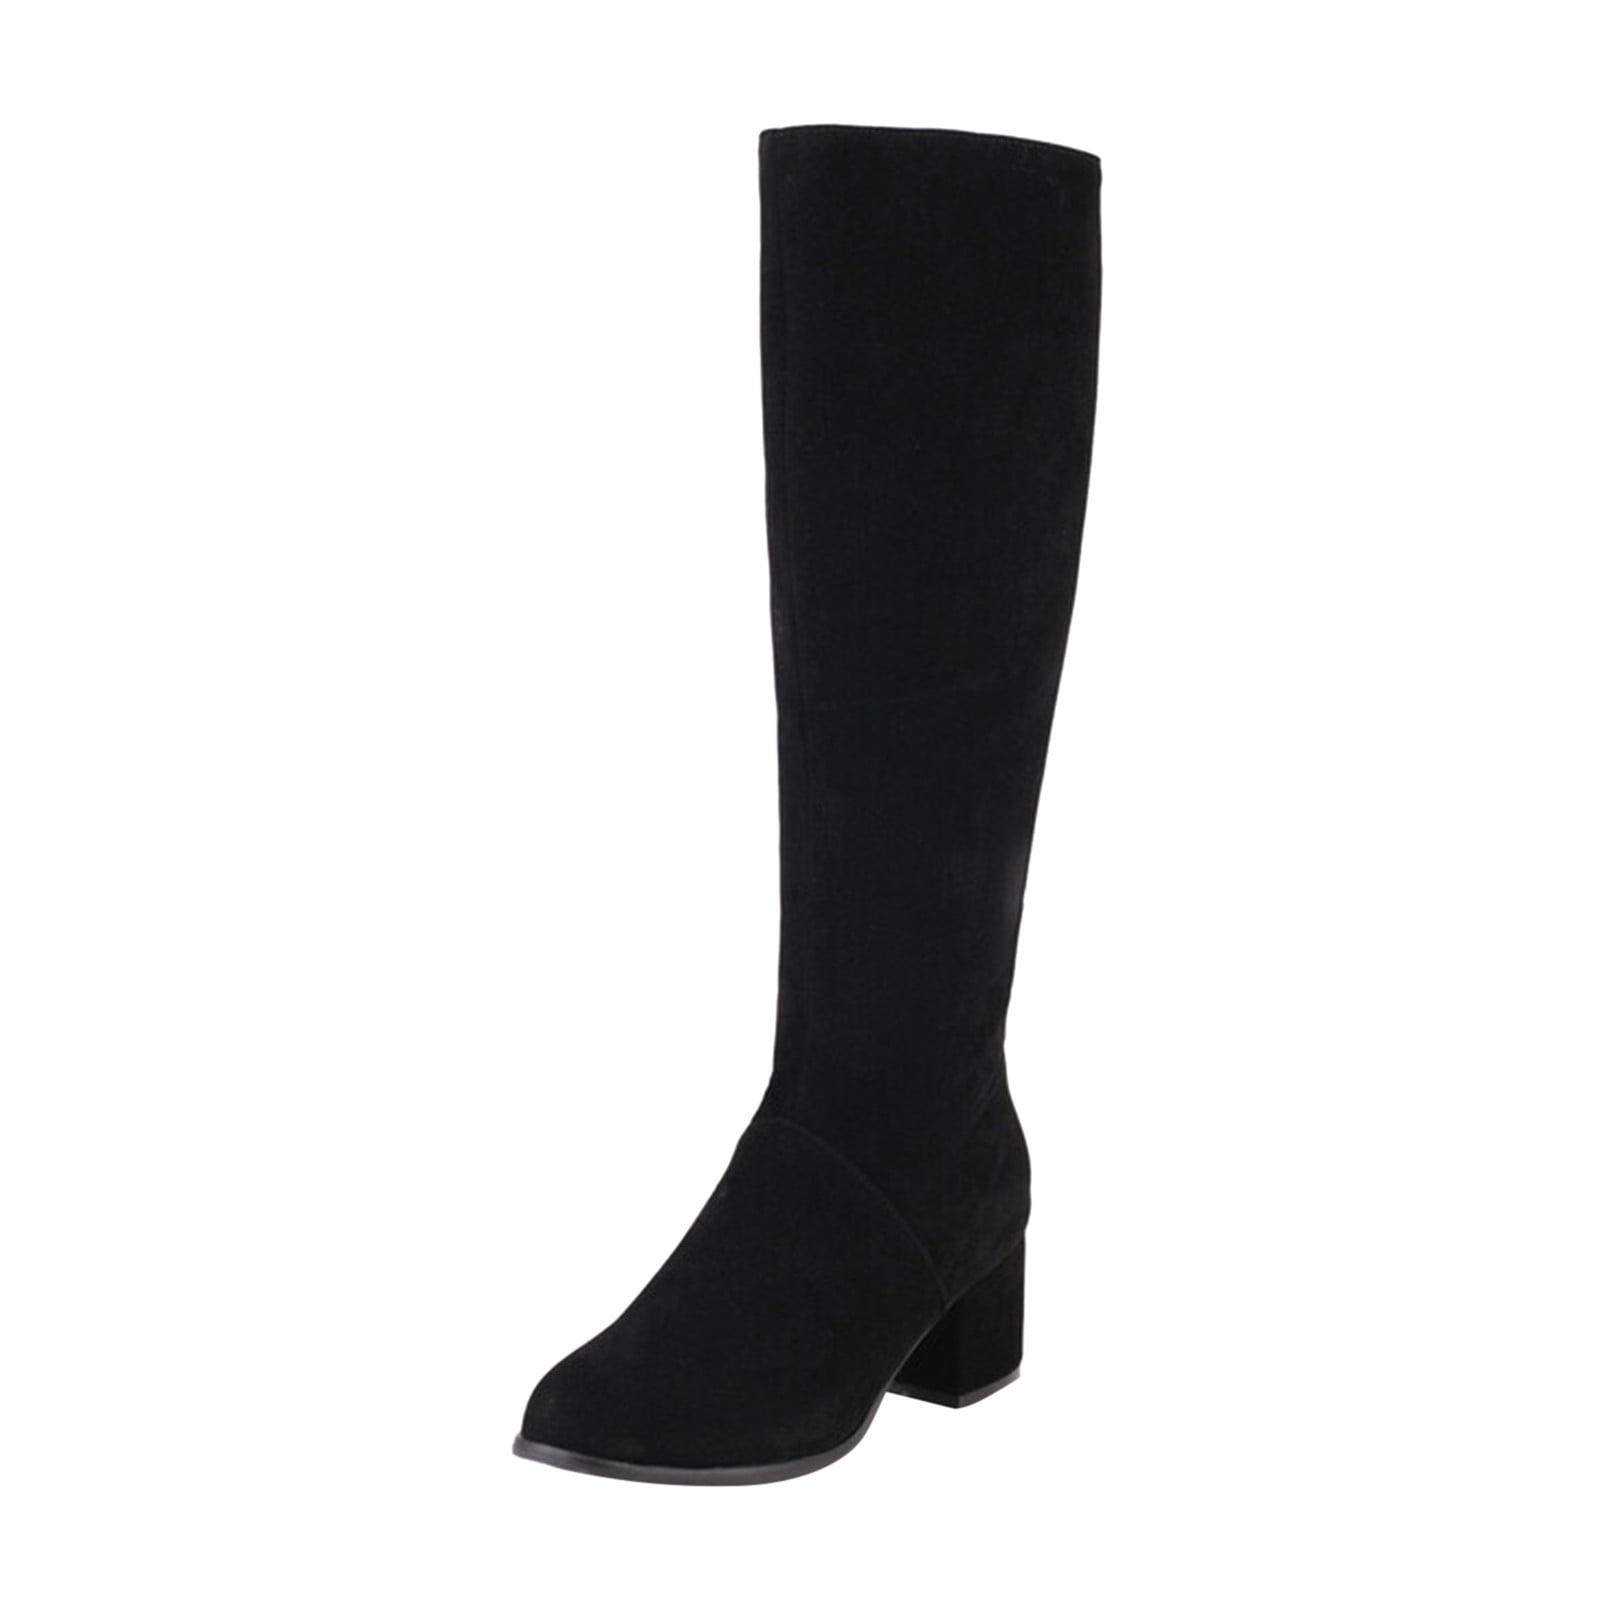 HSMQHJWE Women'S Thigh High Boots Leather Women'S Boots Size 12